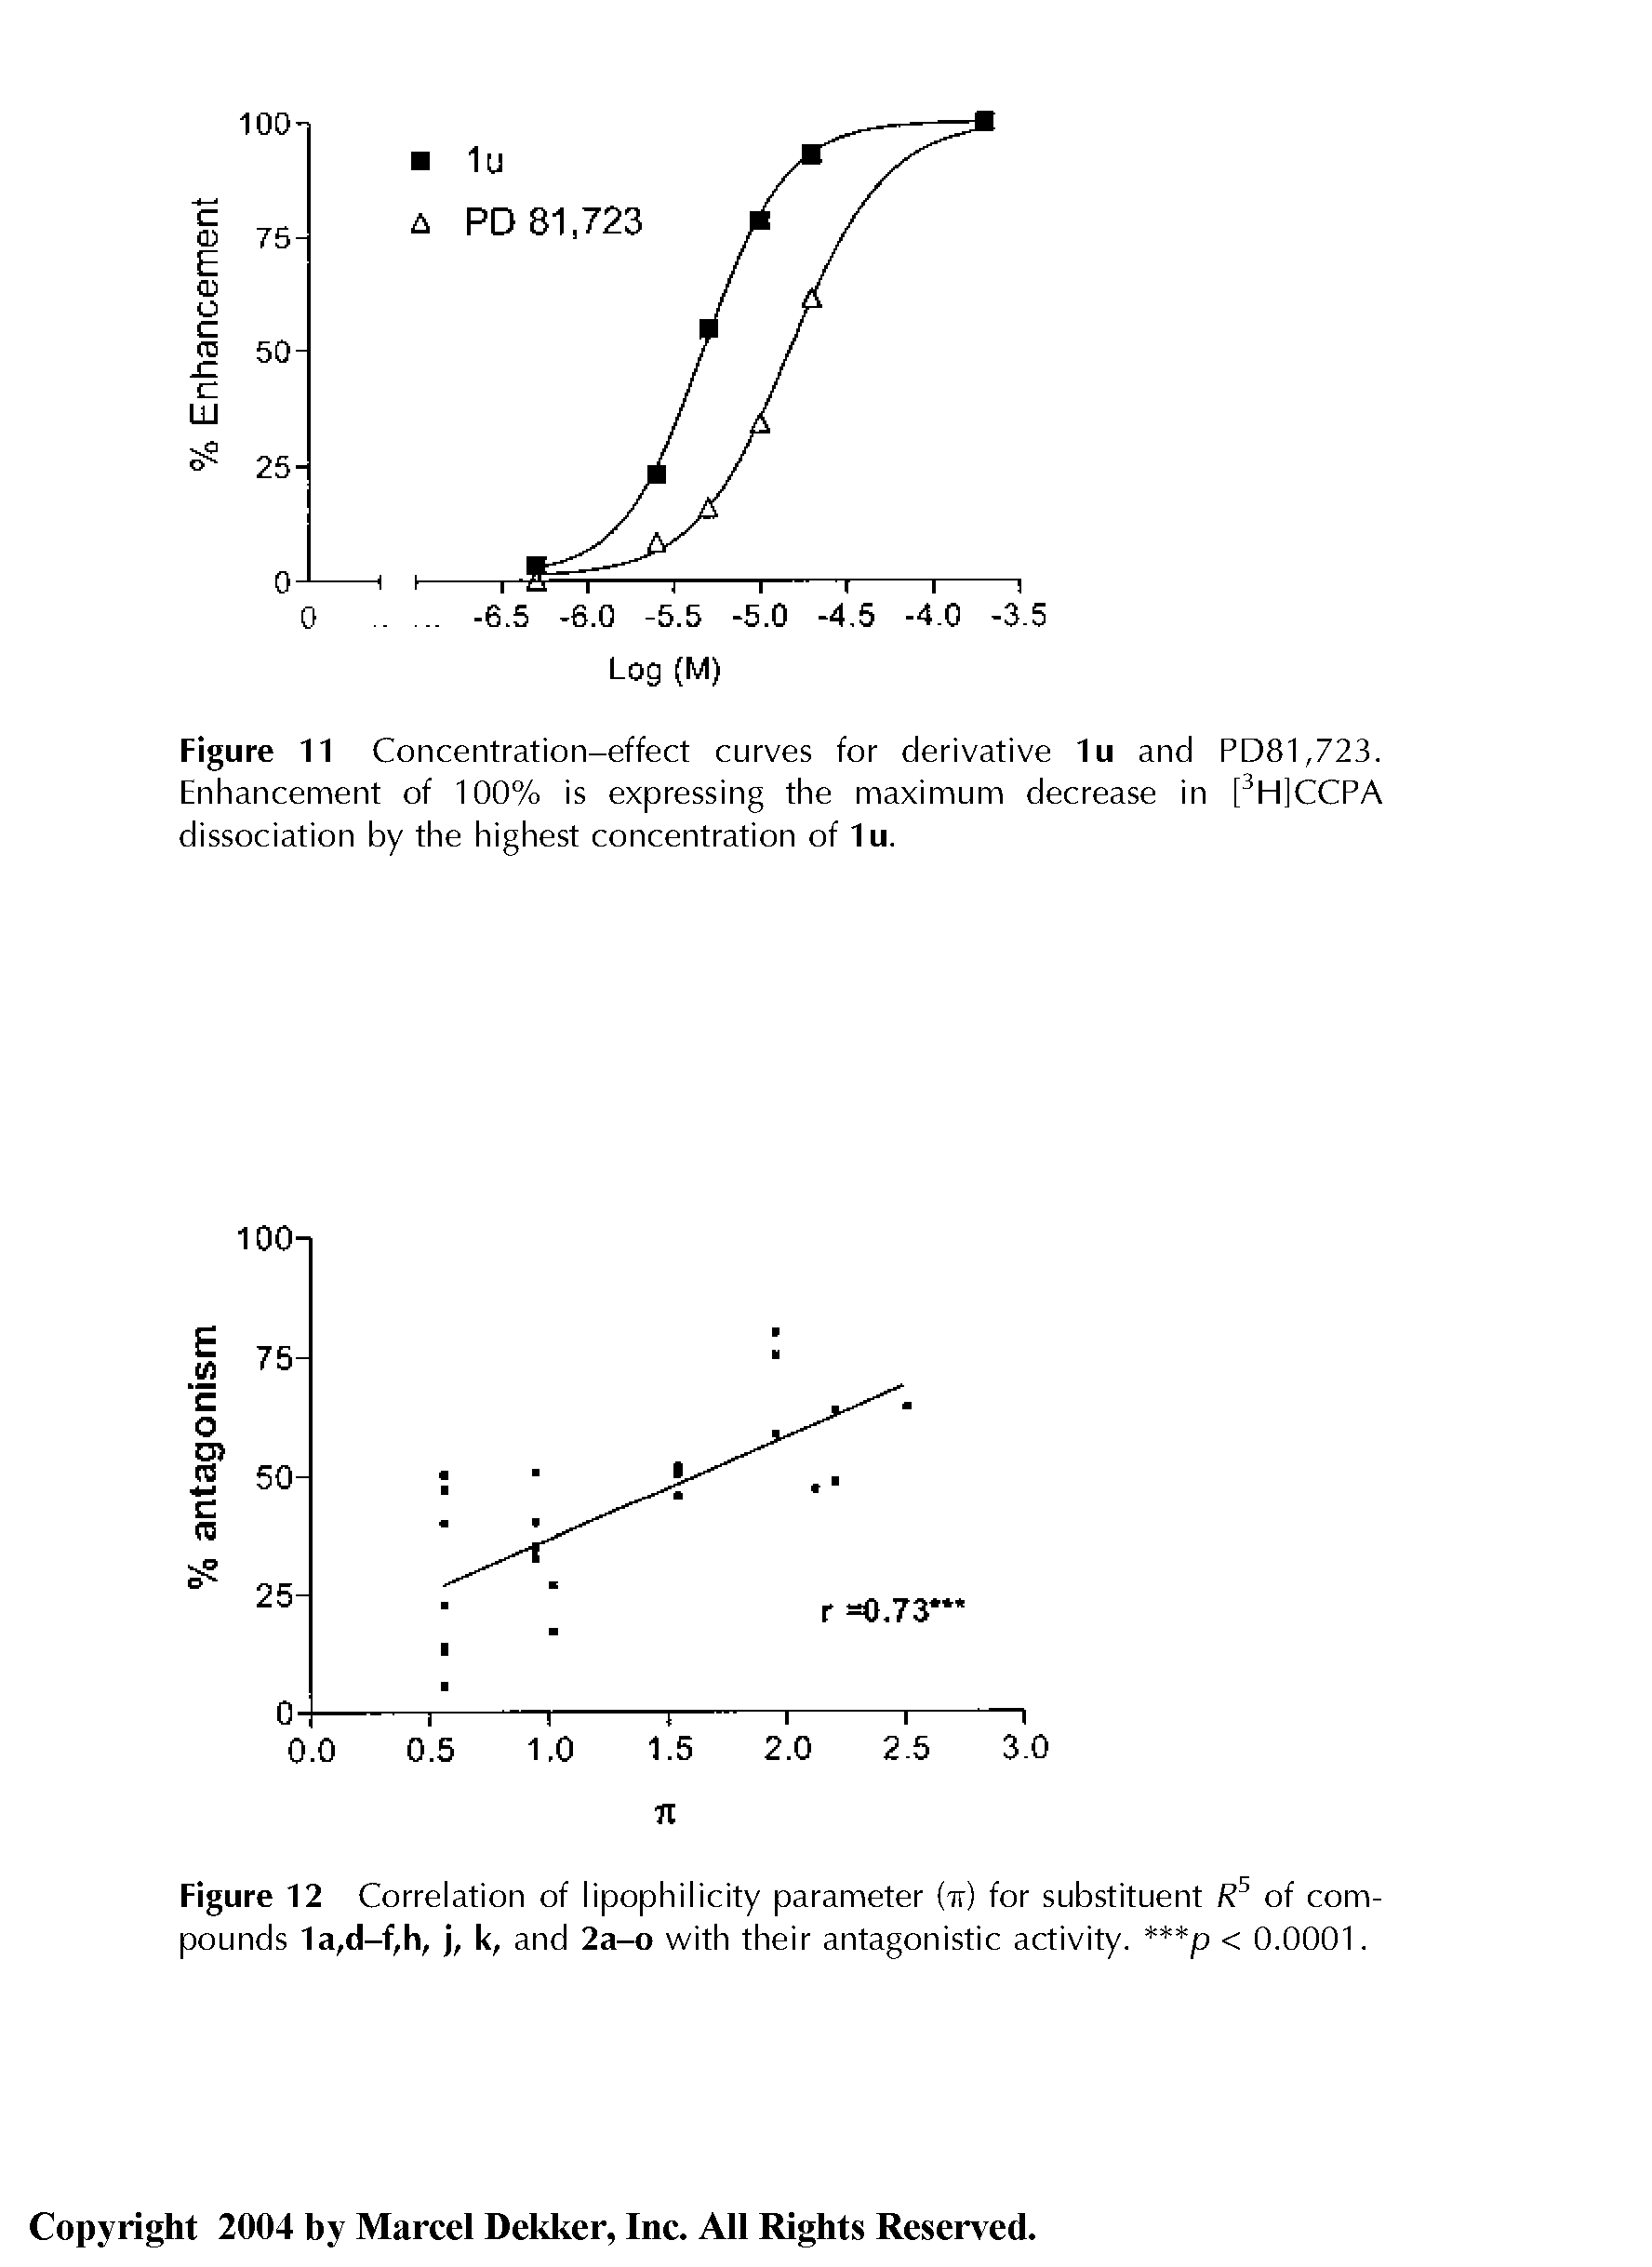 Figure 11 Concentration-effect curves for derivative 1u and PD81,723. Enhancement of 100% is expressing the maximum decrease in [3H]CCPA dissociation by the highest concentration of 1u.